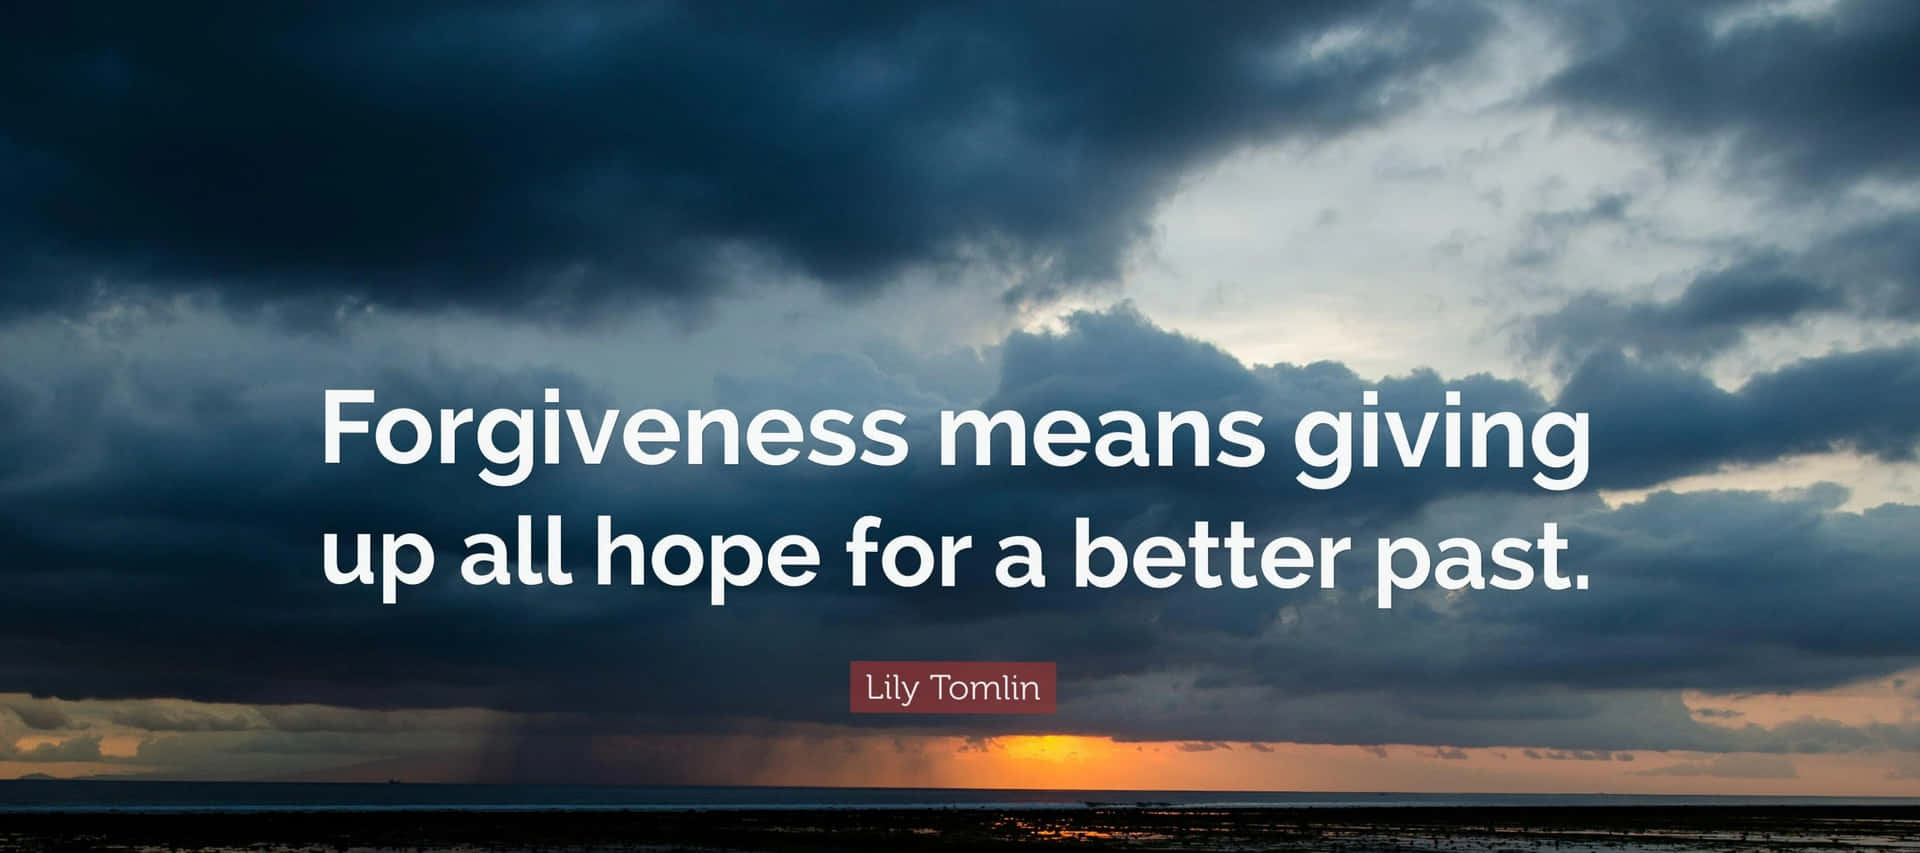 Forgiveness Means Giving Up Hope For A Better Past